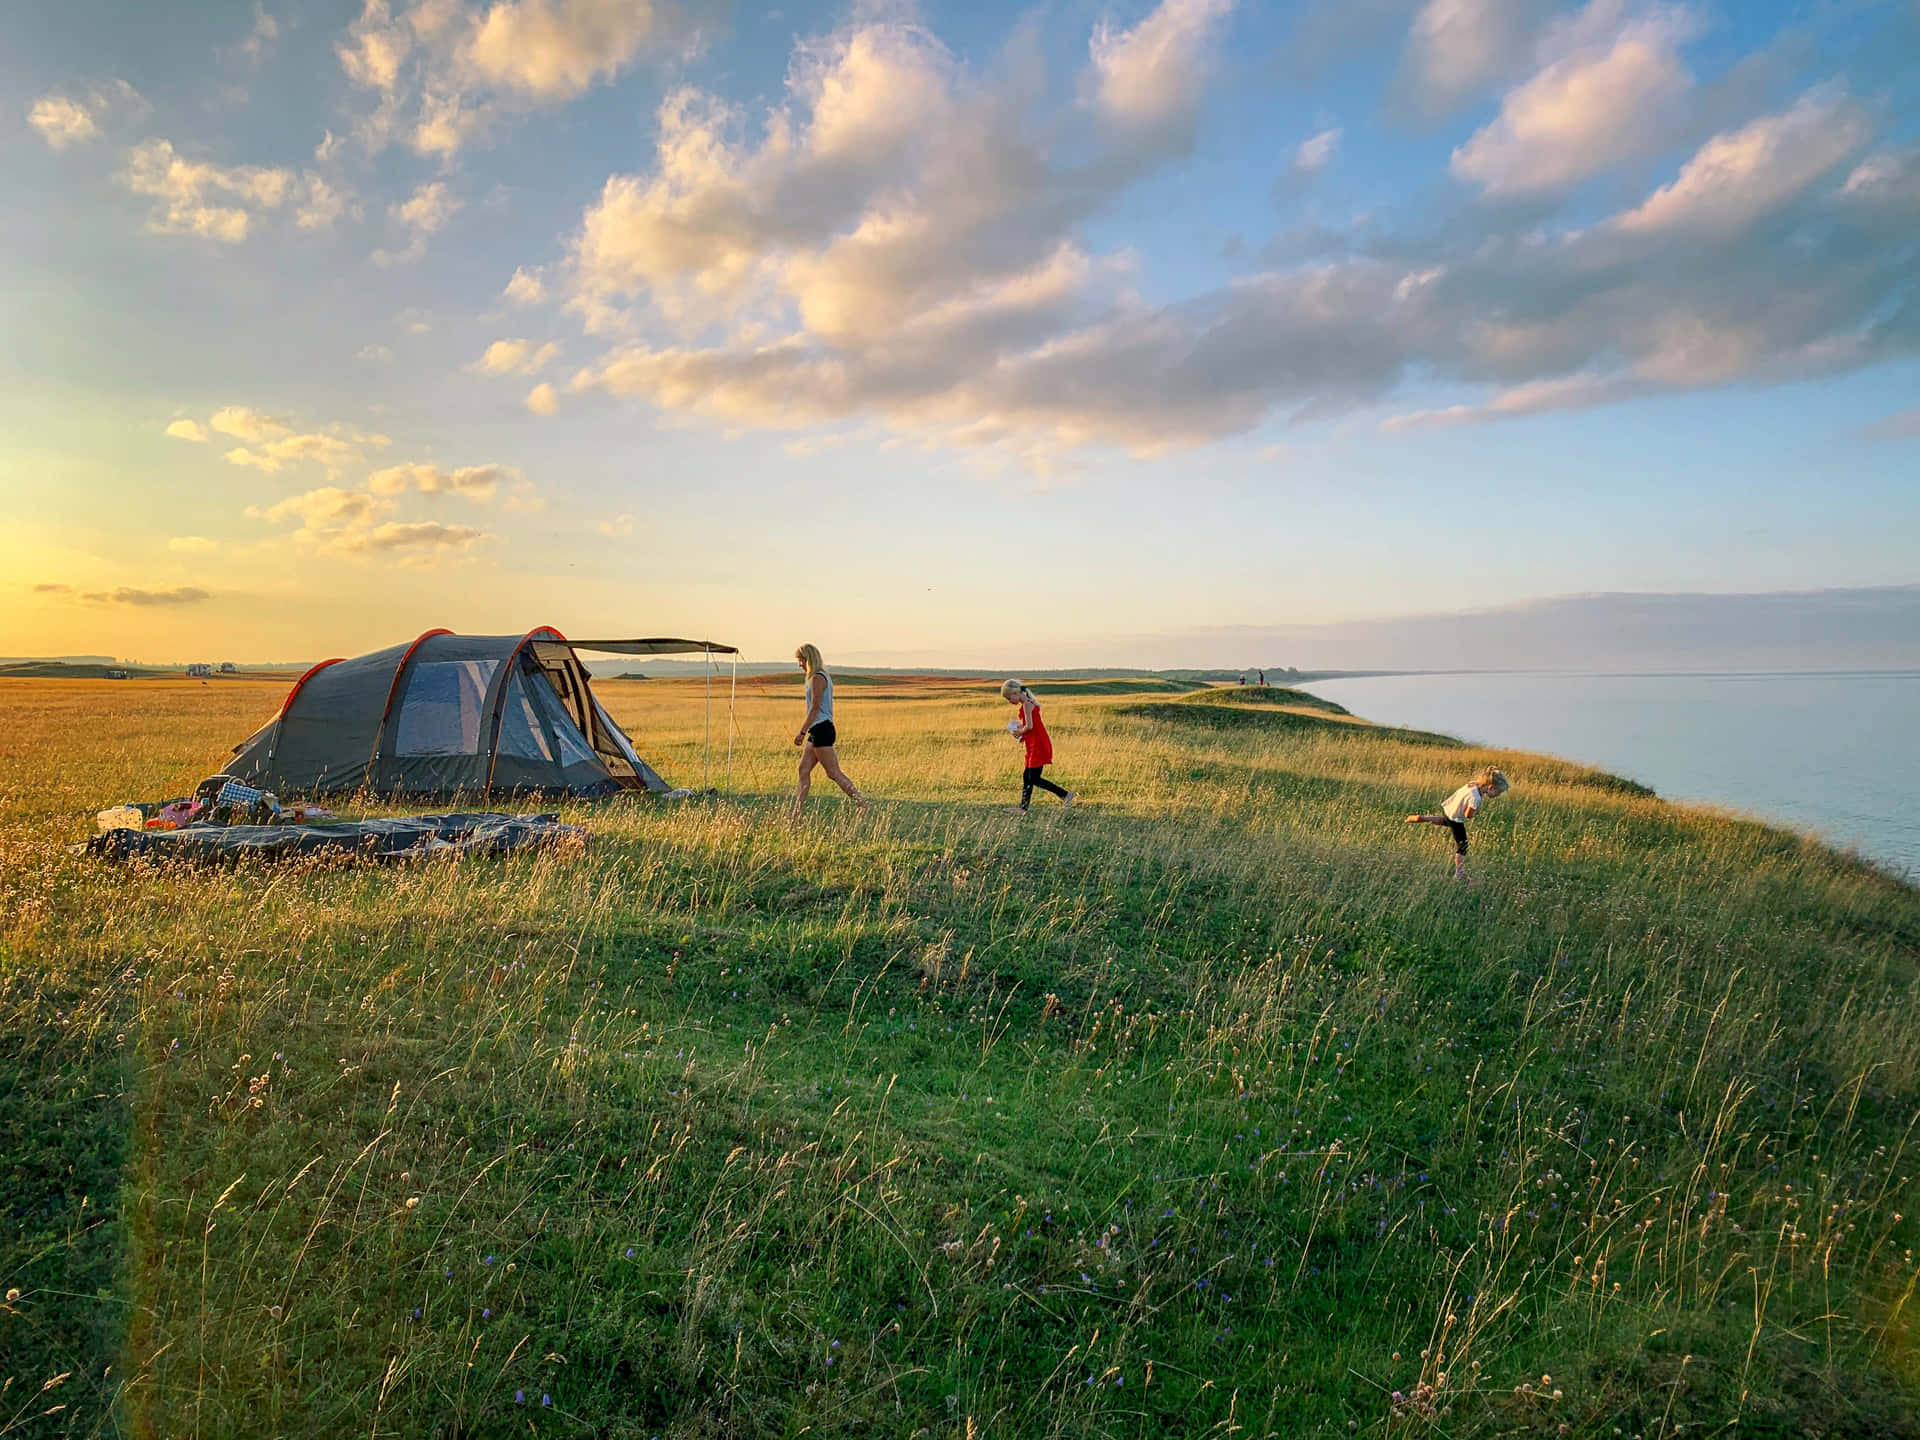 Get some fresh air and peacefulness with a weekend camping trip!